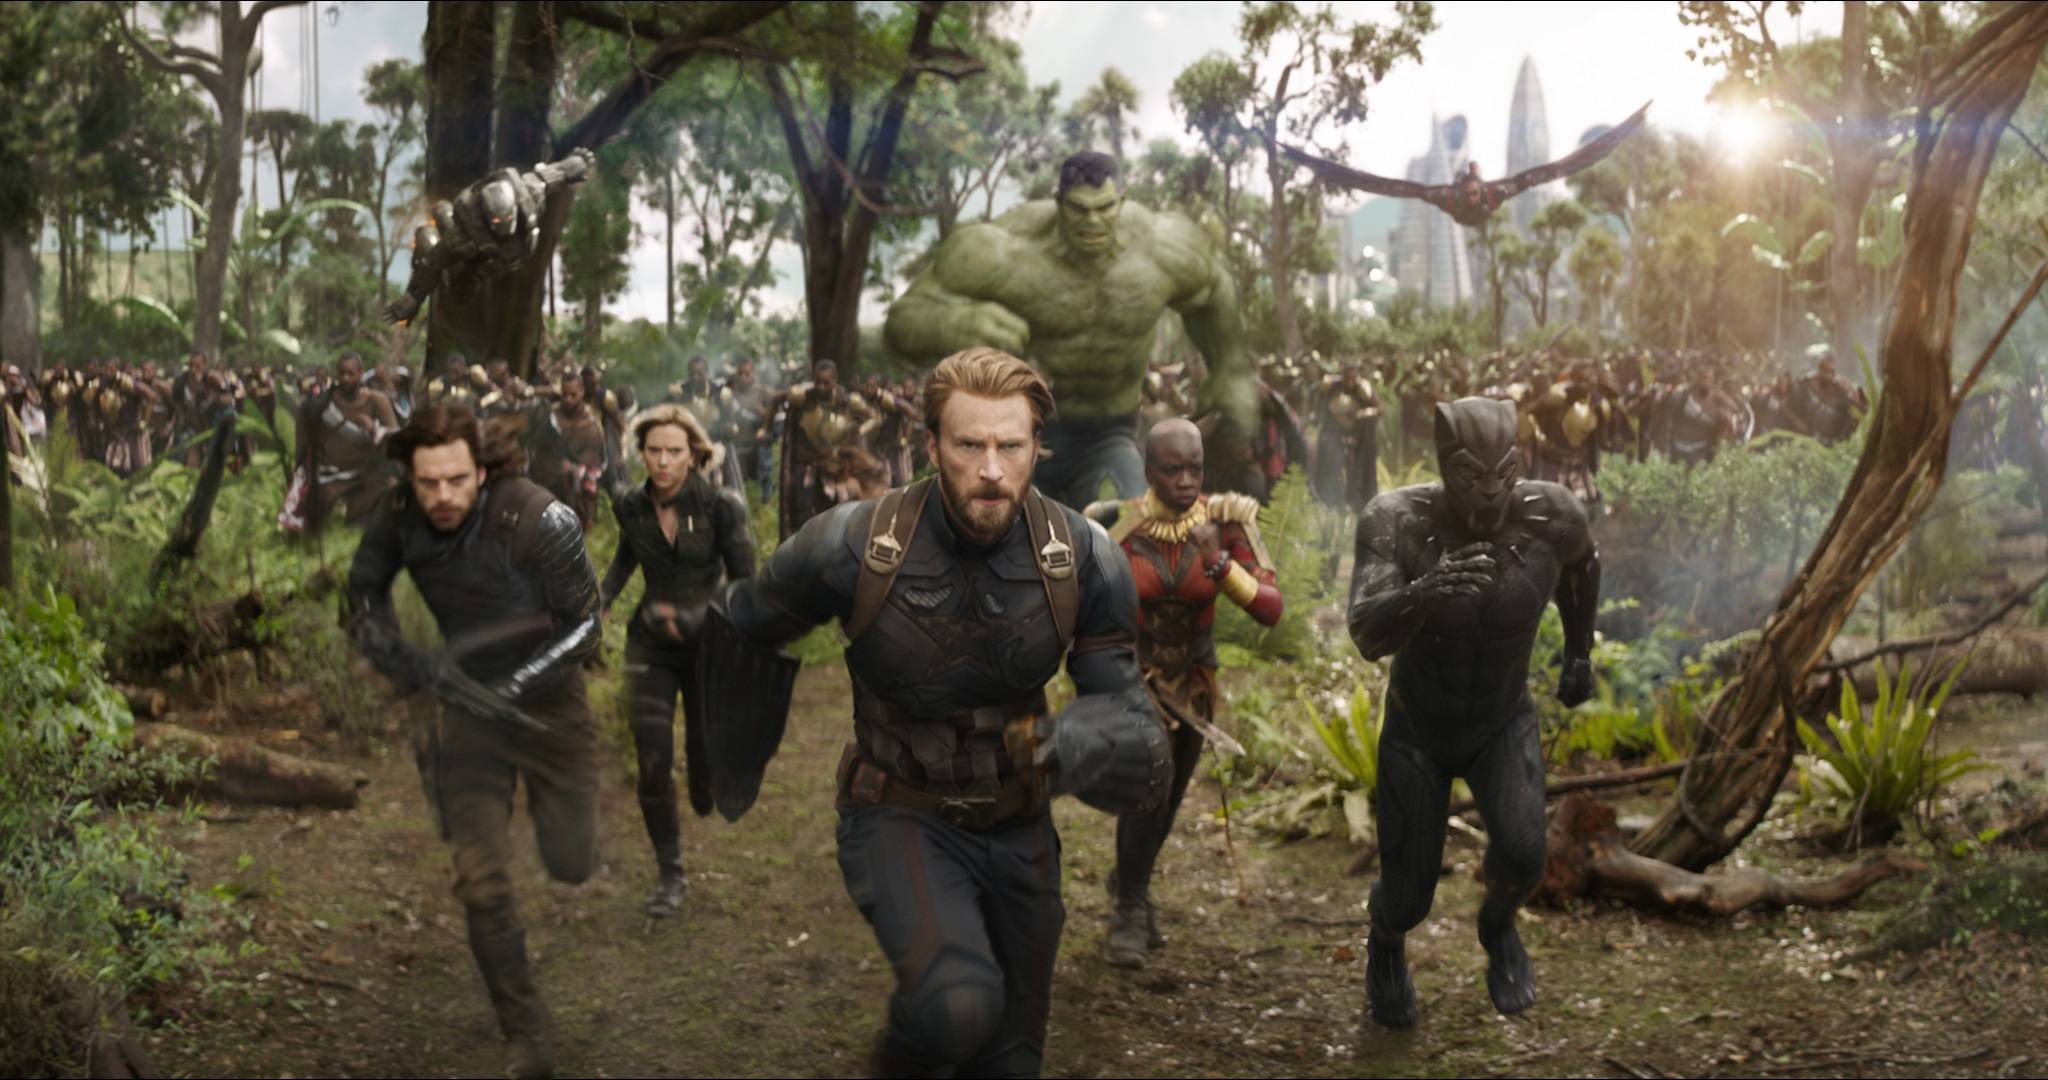 This 'Avengers: Infinity War' deleted scene sounds amazing, but we're glad it was cut